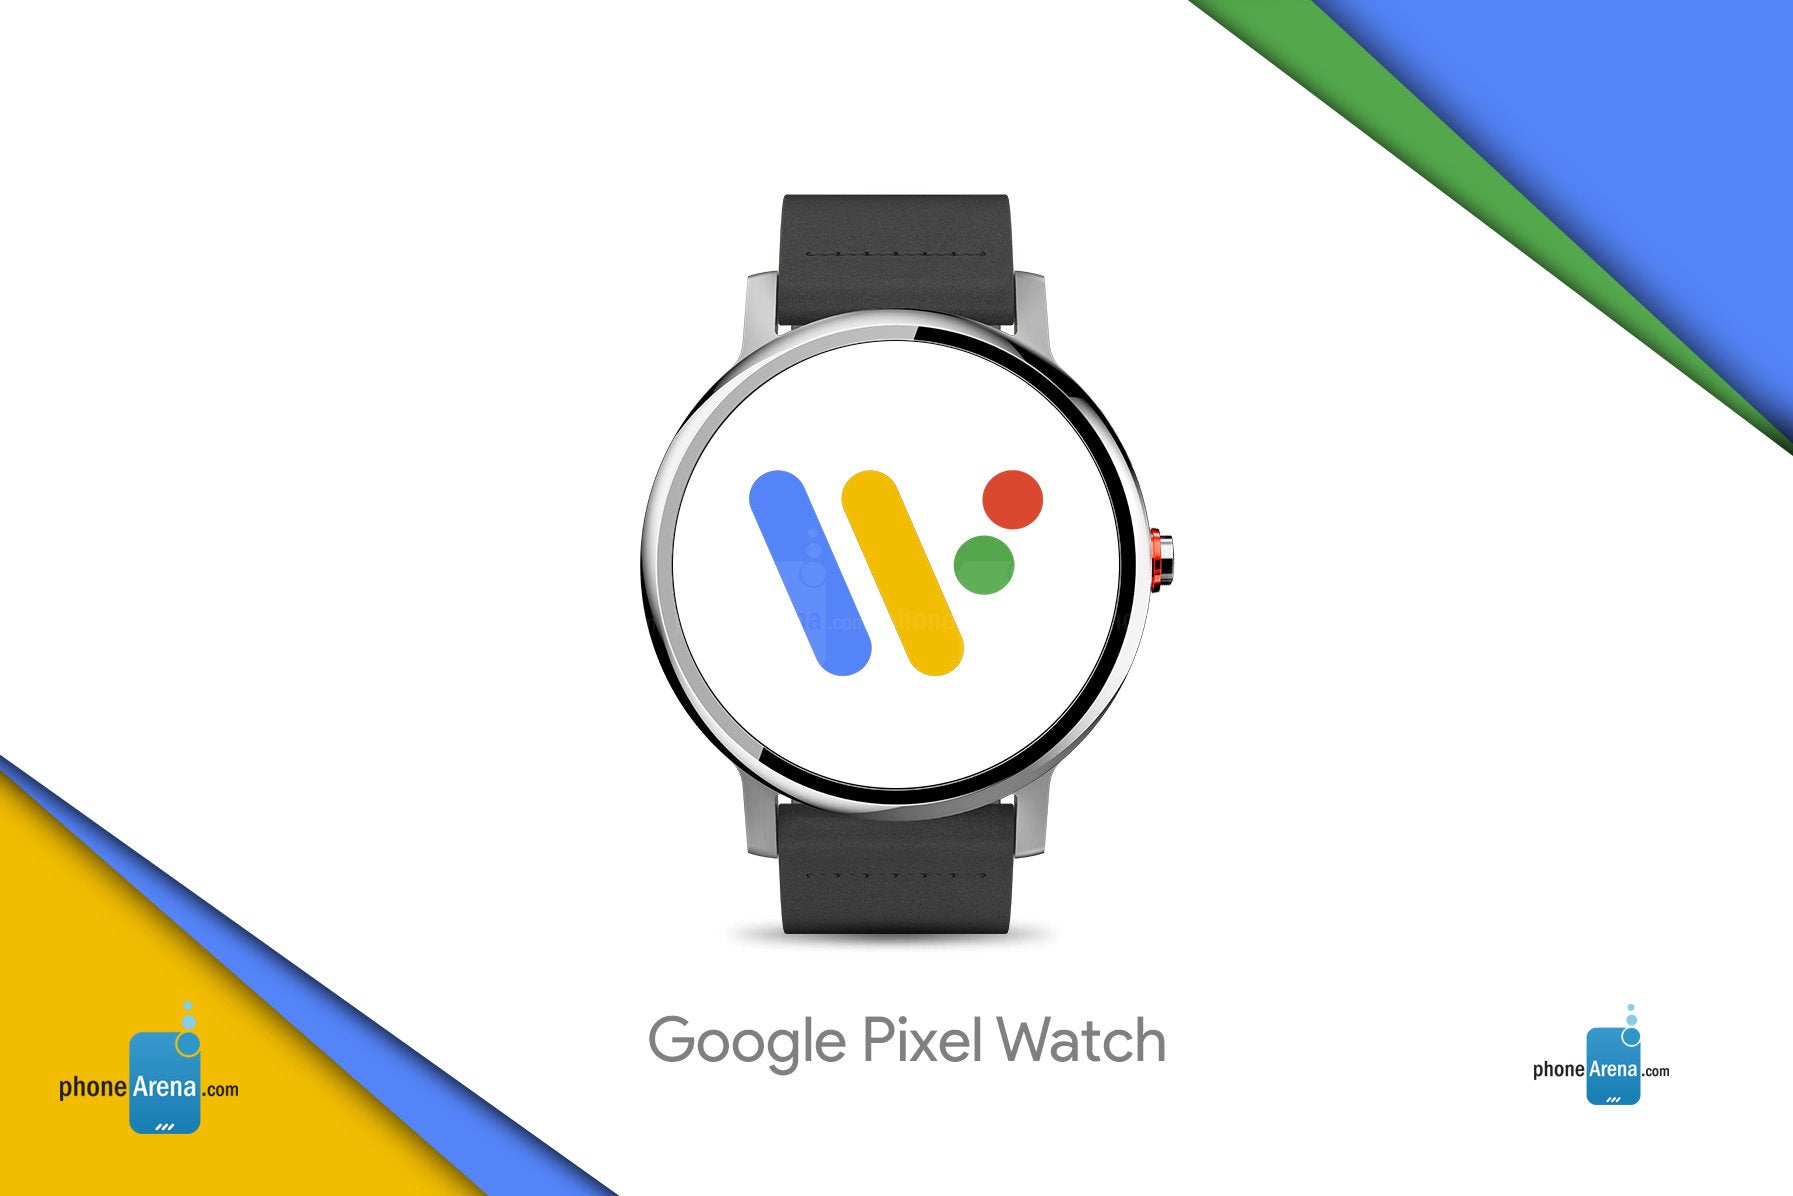 With the Pixel Watch closer to release, Google is enforcing new Wear OS app quality guidelines